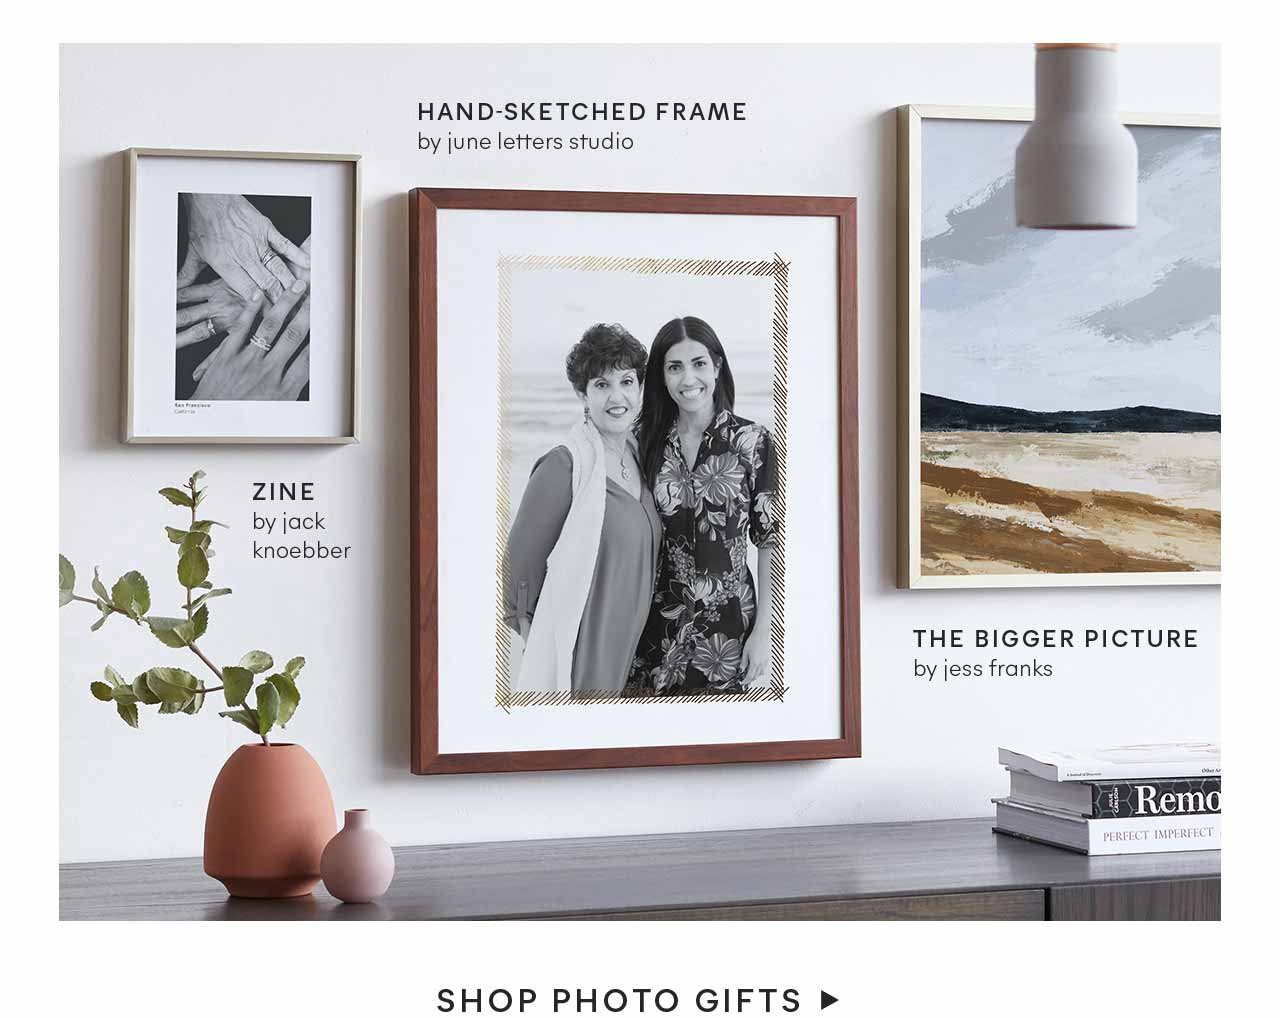 Shop Photo Gifts